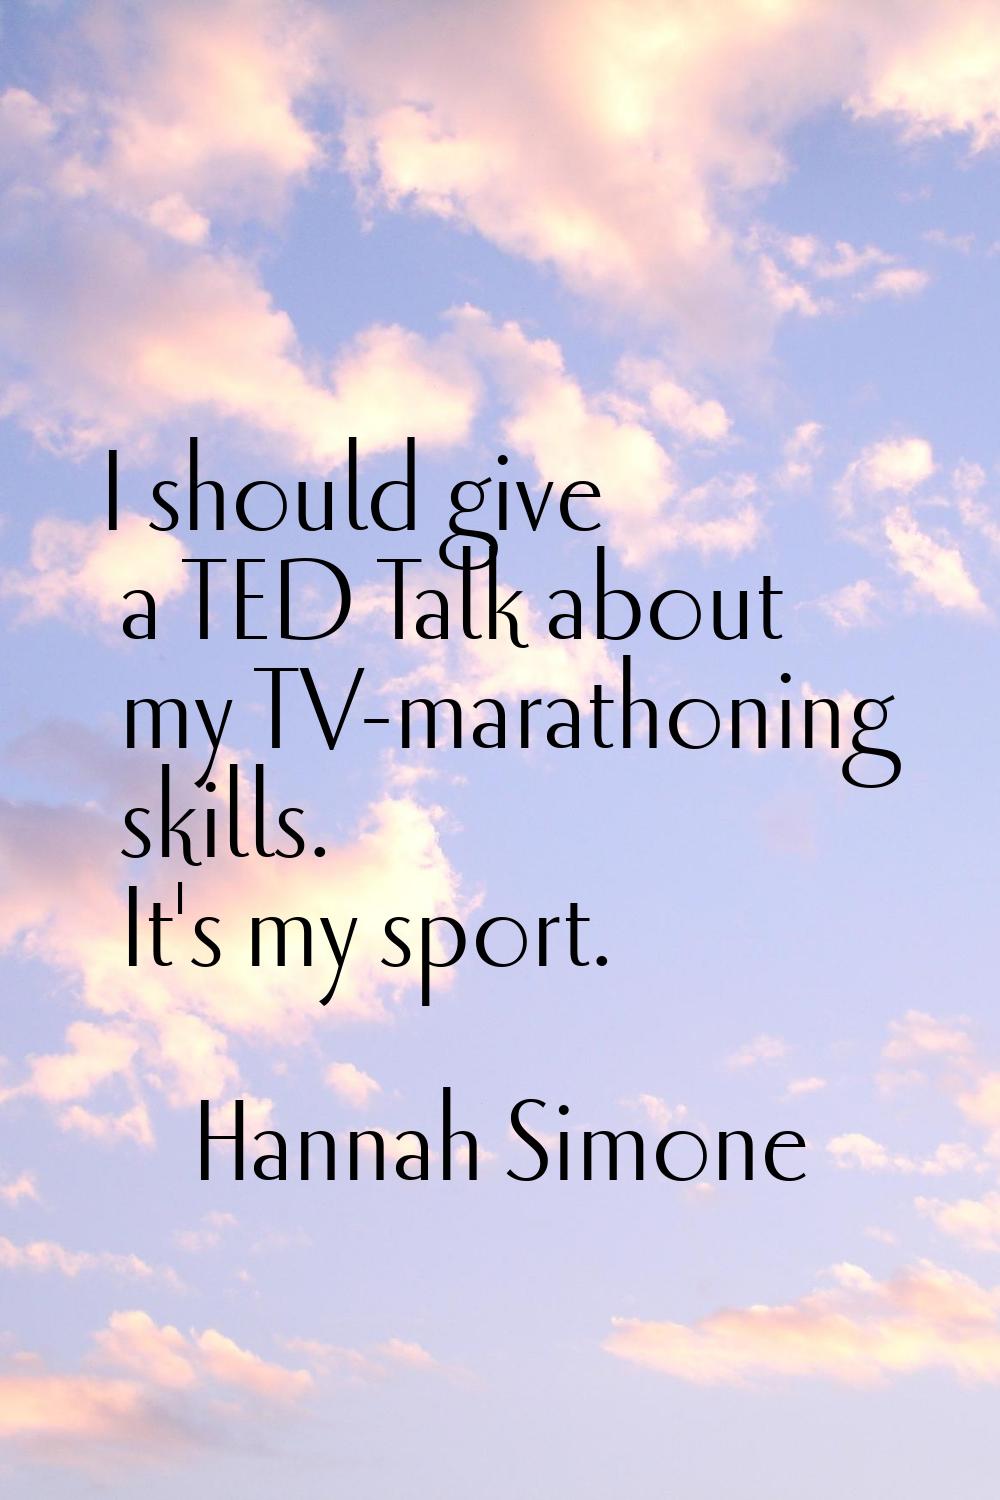 I should give a TED Talk about my TV-marathoning skills. It's my sport.